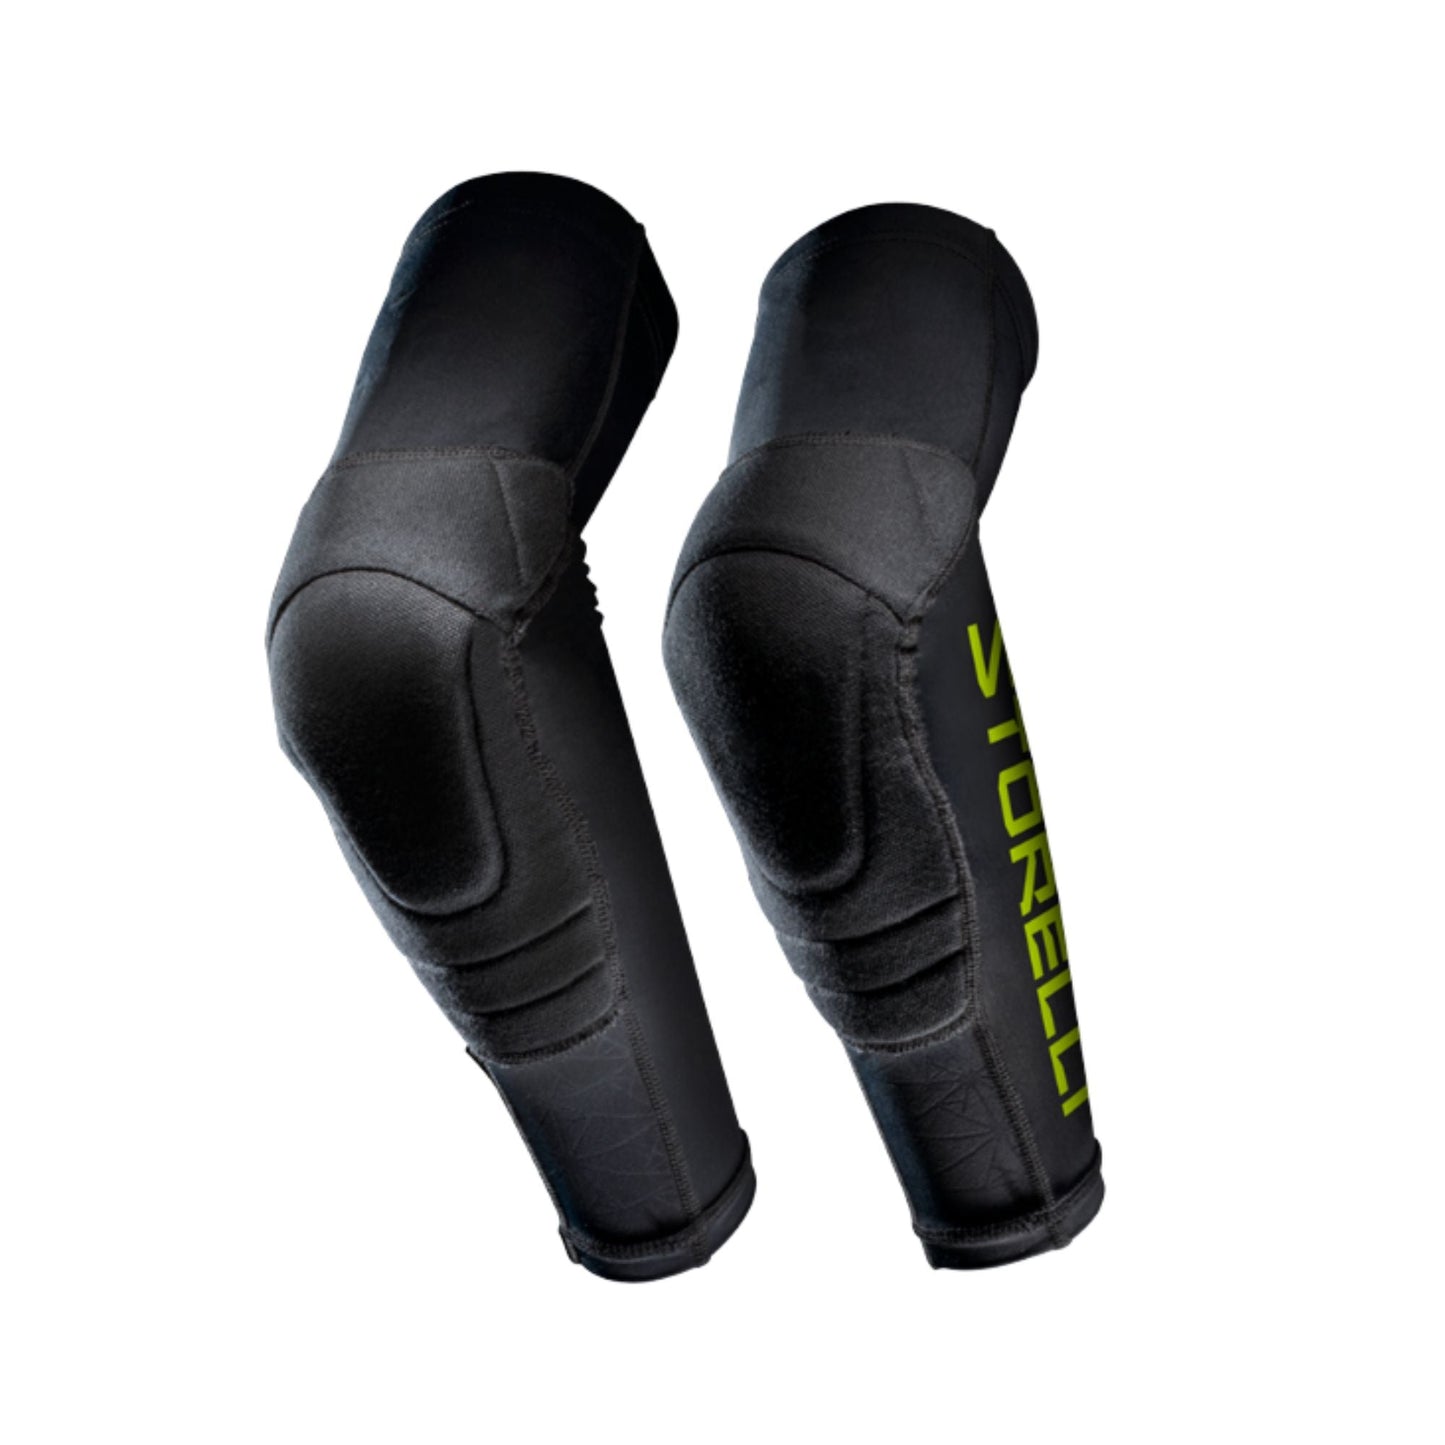 Elbow Guards by Storelli Elbow Guards ITASPORT 